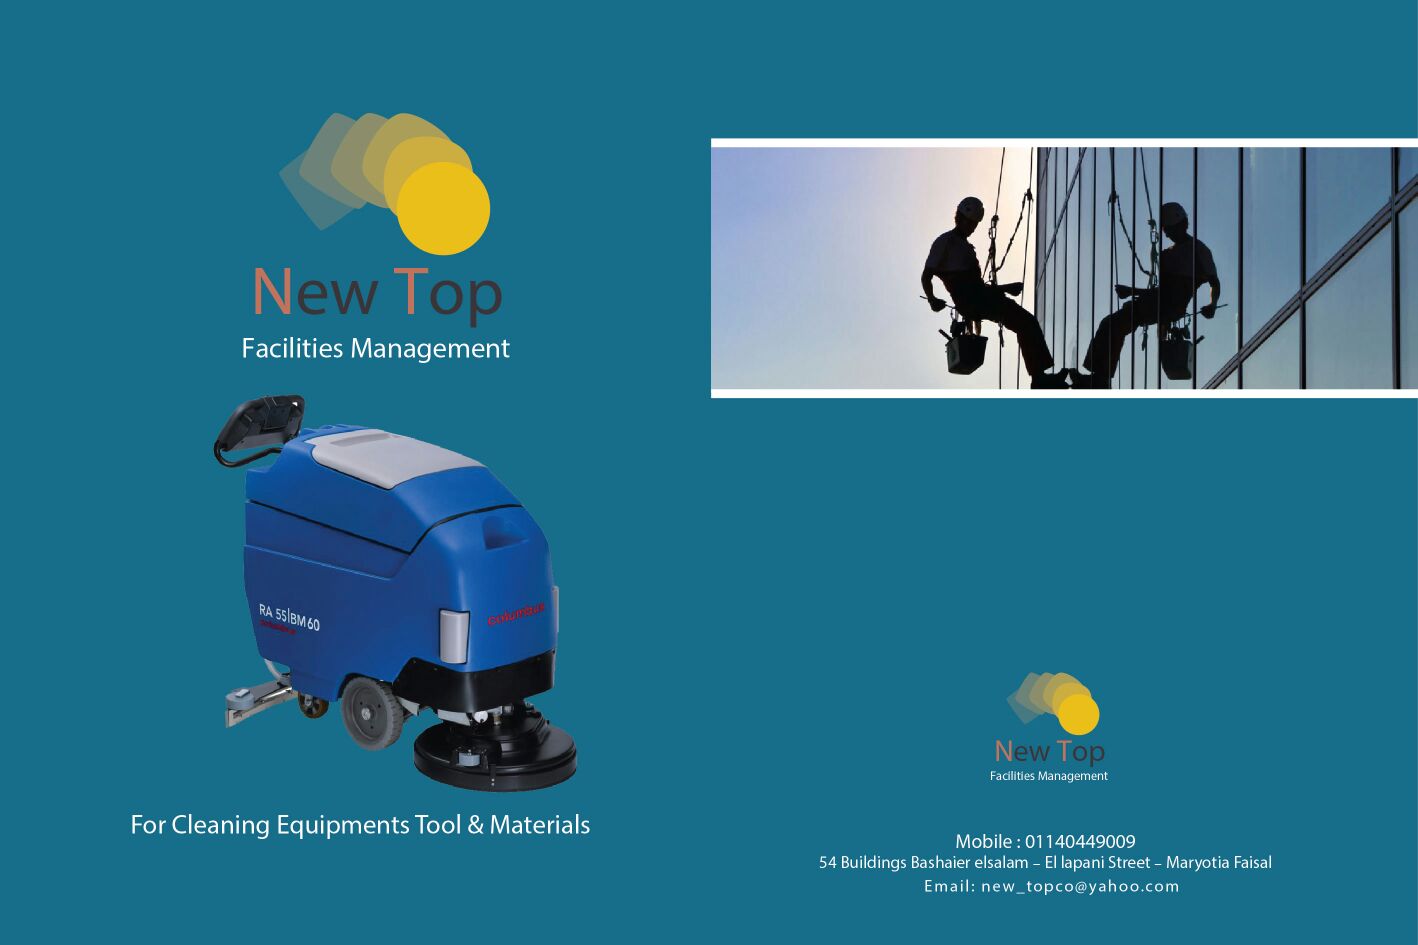 Newtop Facilities Management Make Your World As Clean As Mine